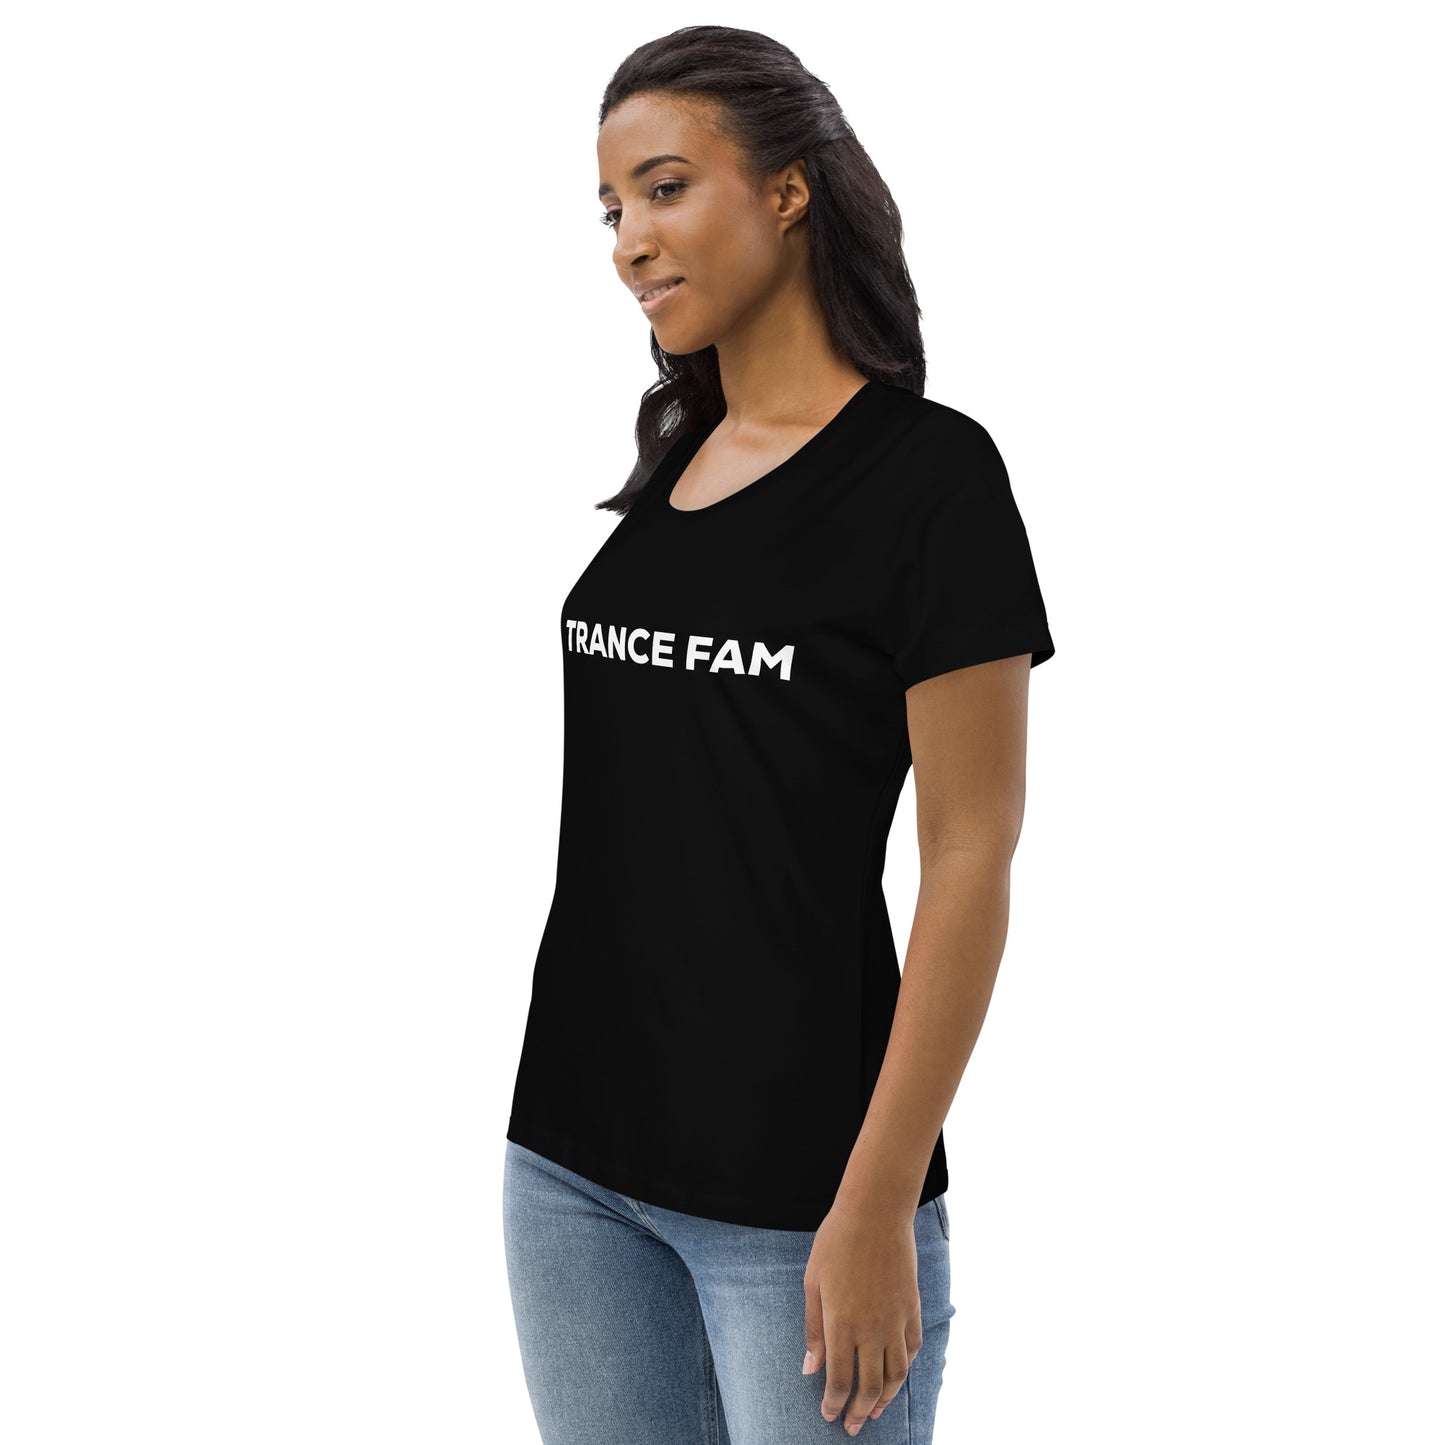 Trance Fam - Women's Fitted T-Shirt